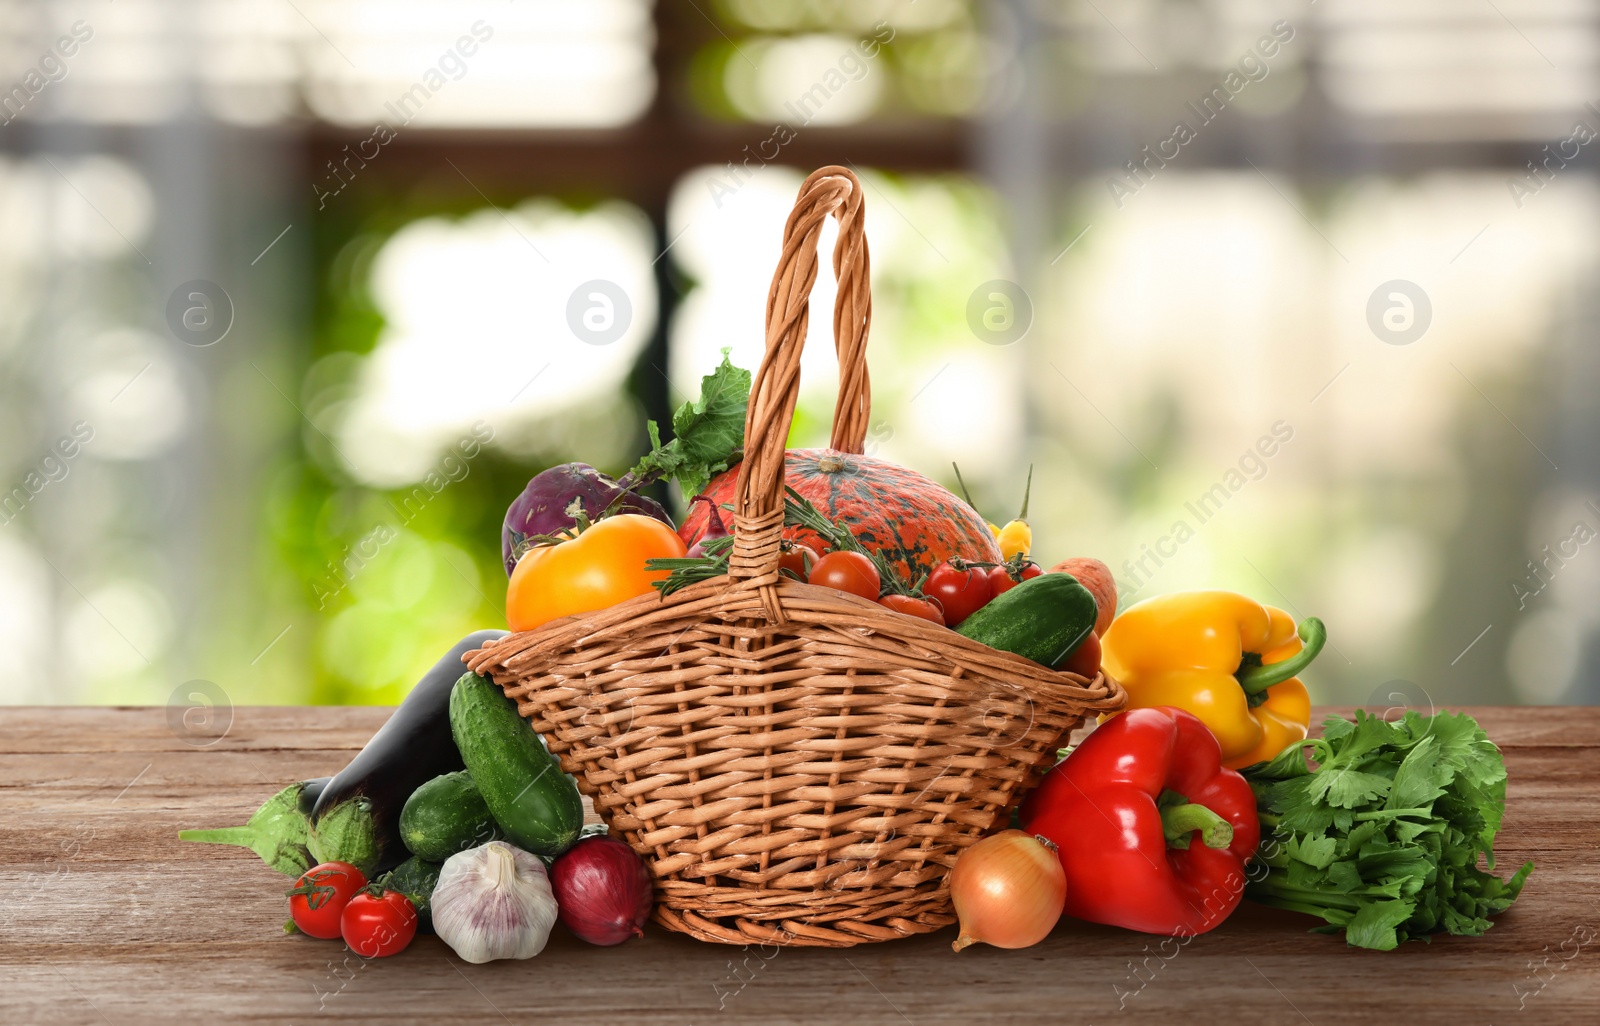 Image of Wicker basket with fresh vegetables on wooden table in kitchen